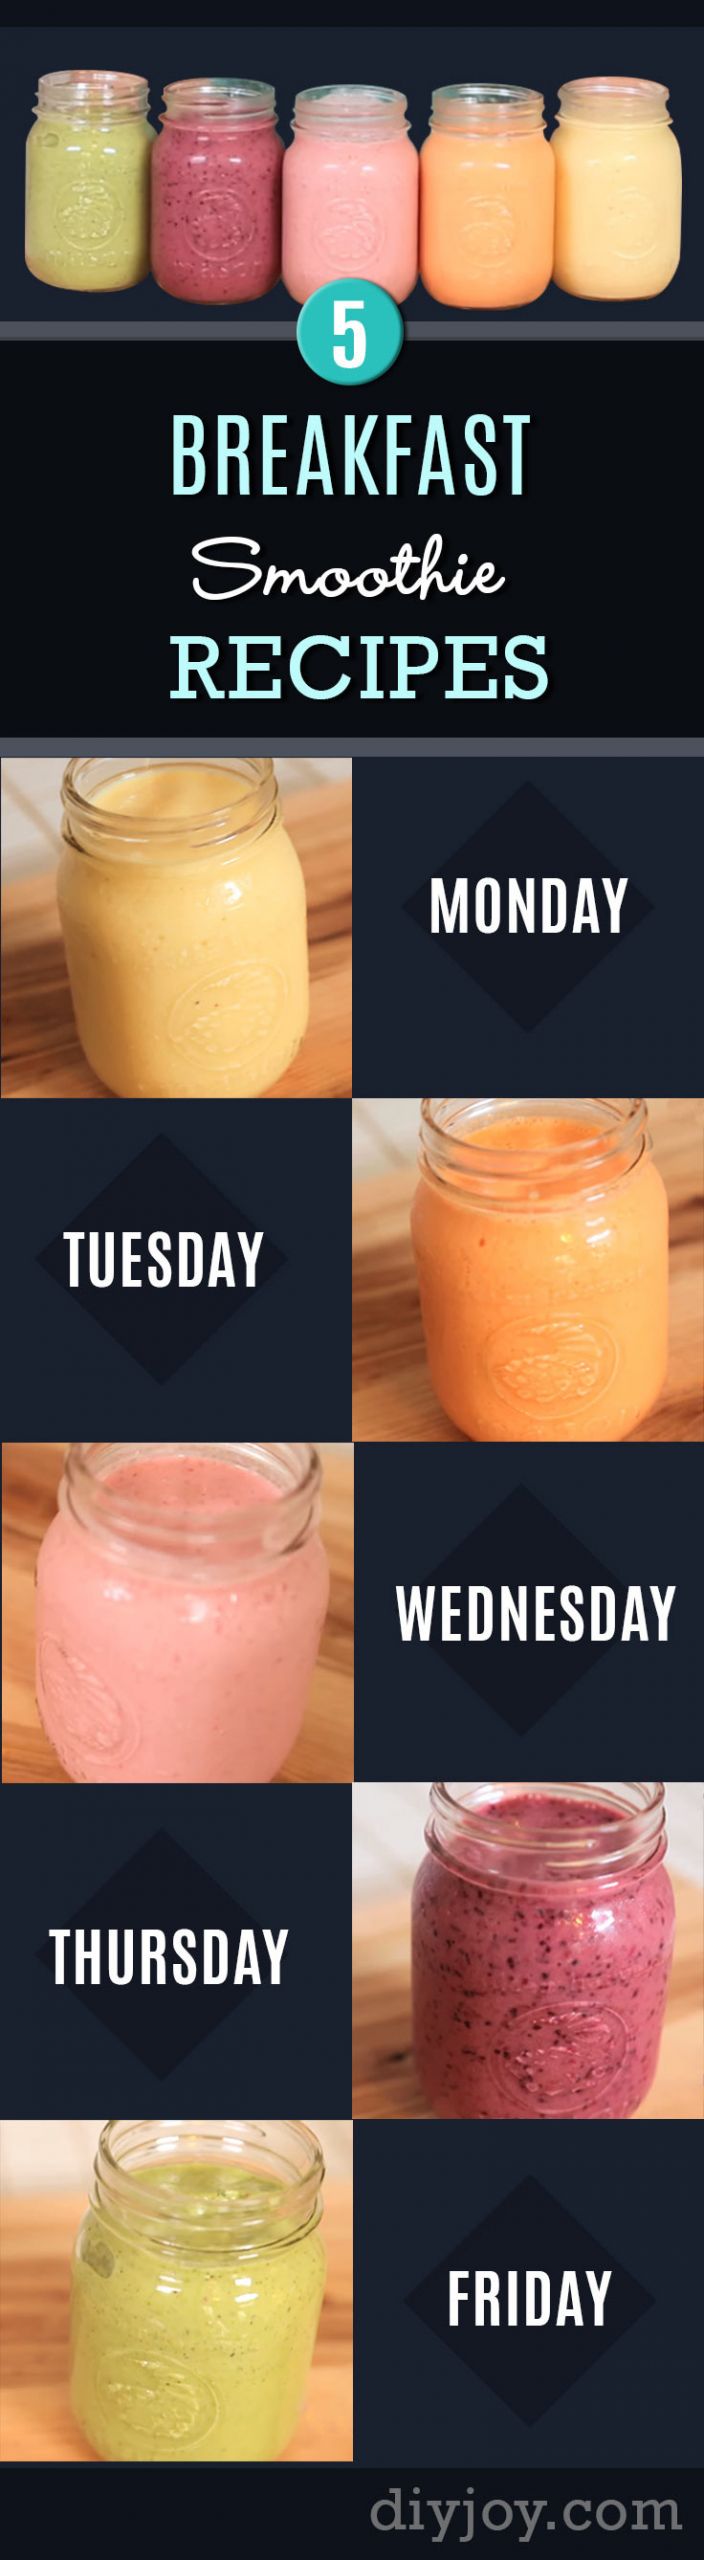 Low Calorie Protein Smoothies
 Monday to Friday 5 Breakfast Smoothie Recipes